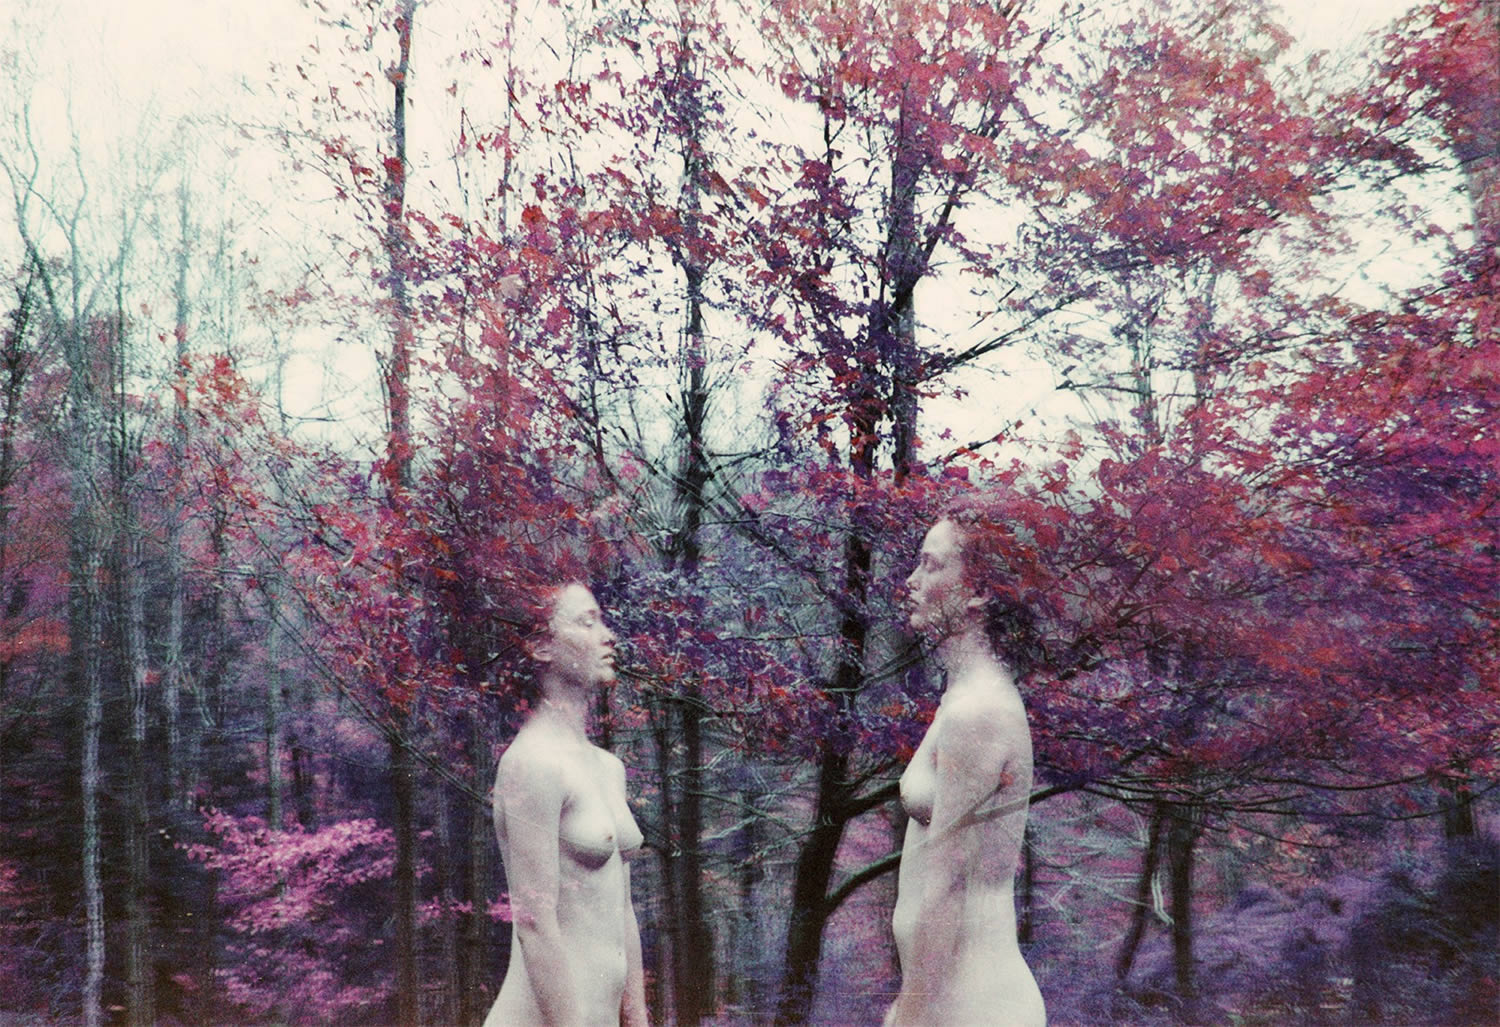 nudes in forest, by amanda charchian